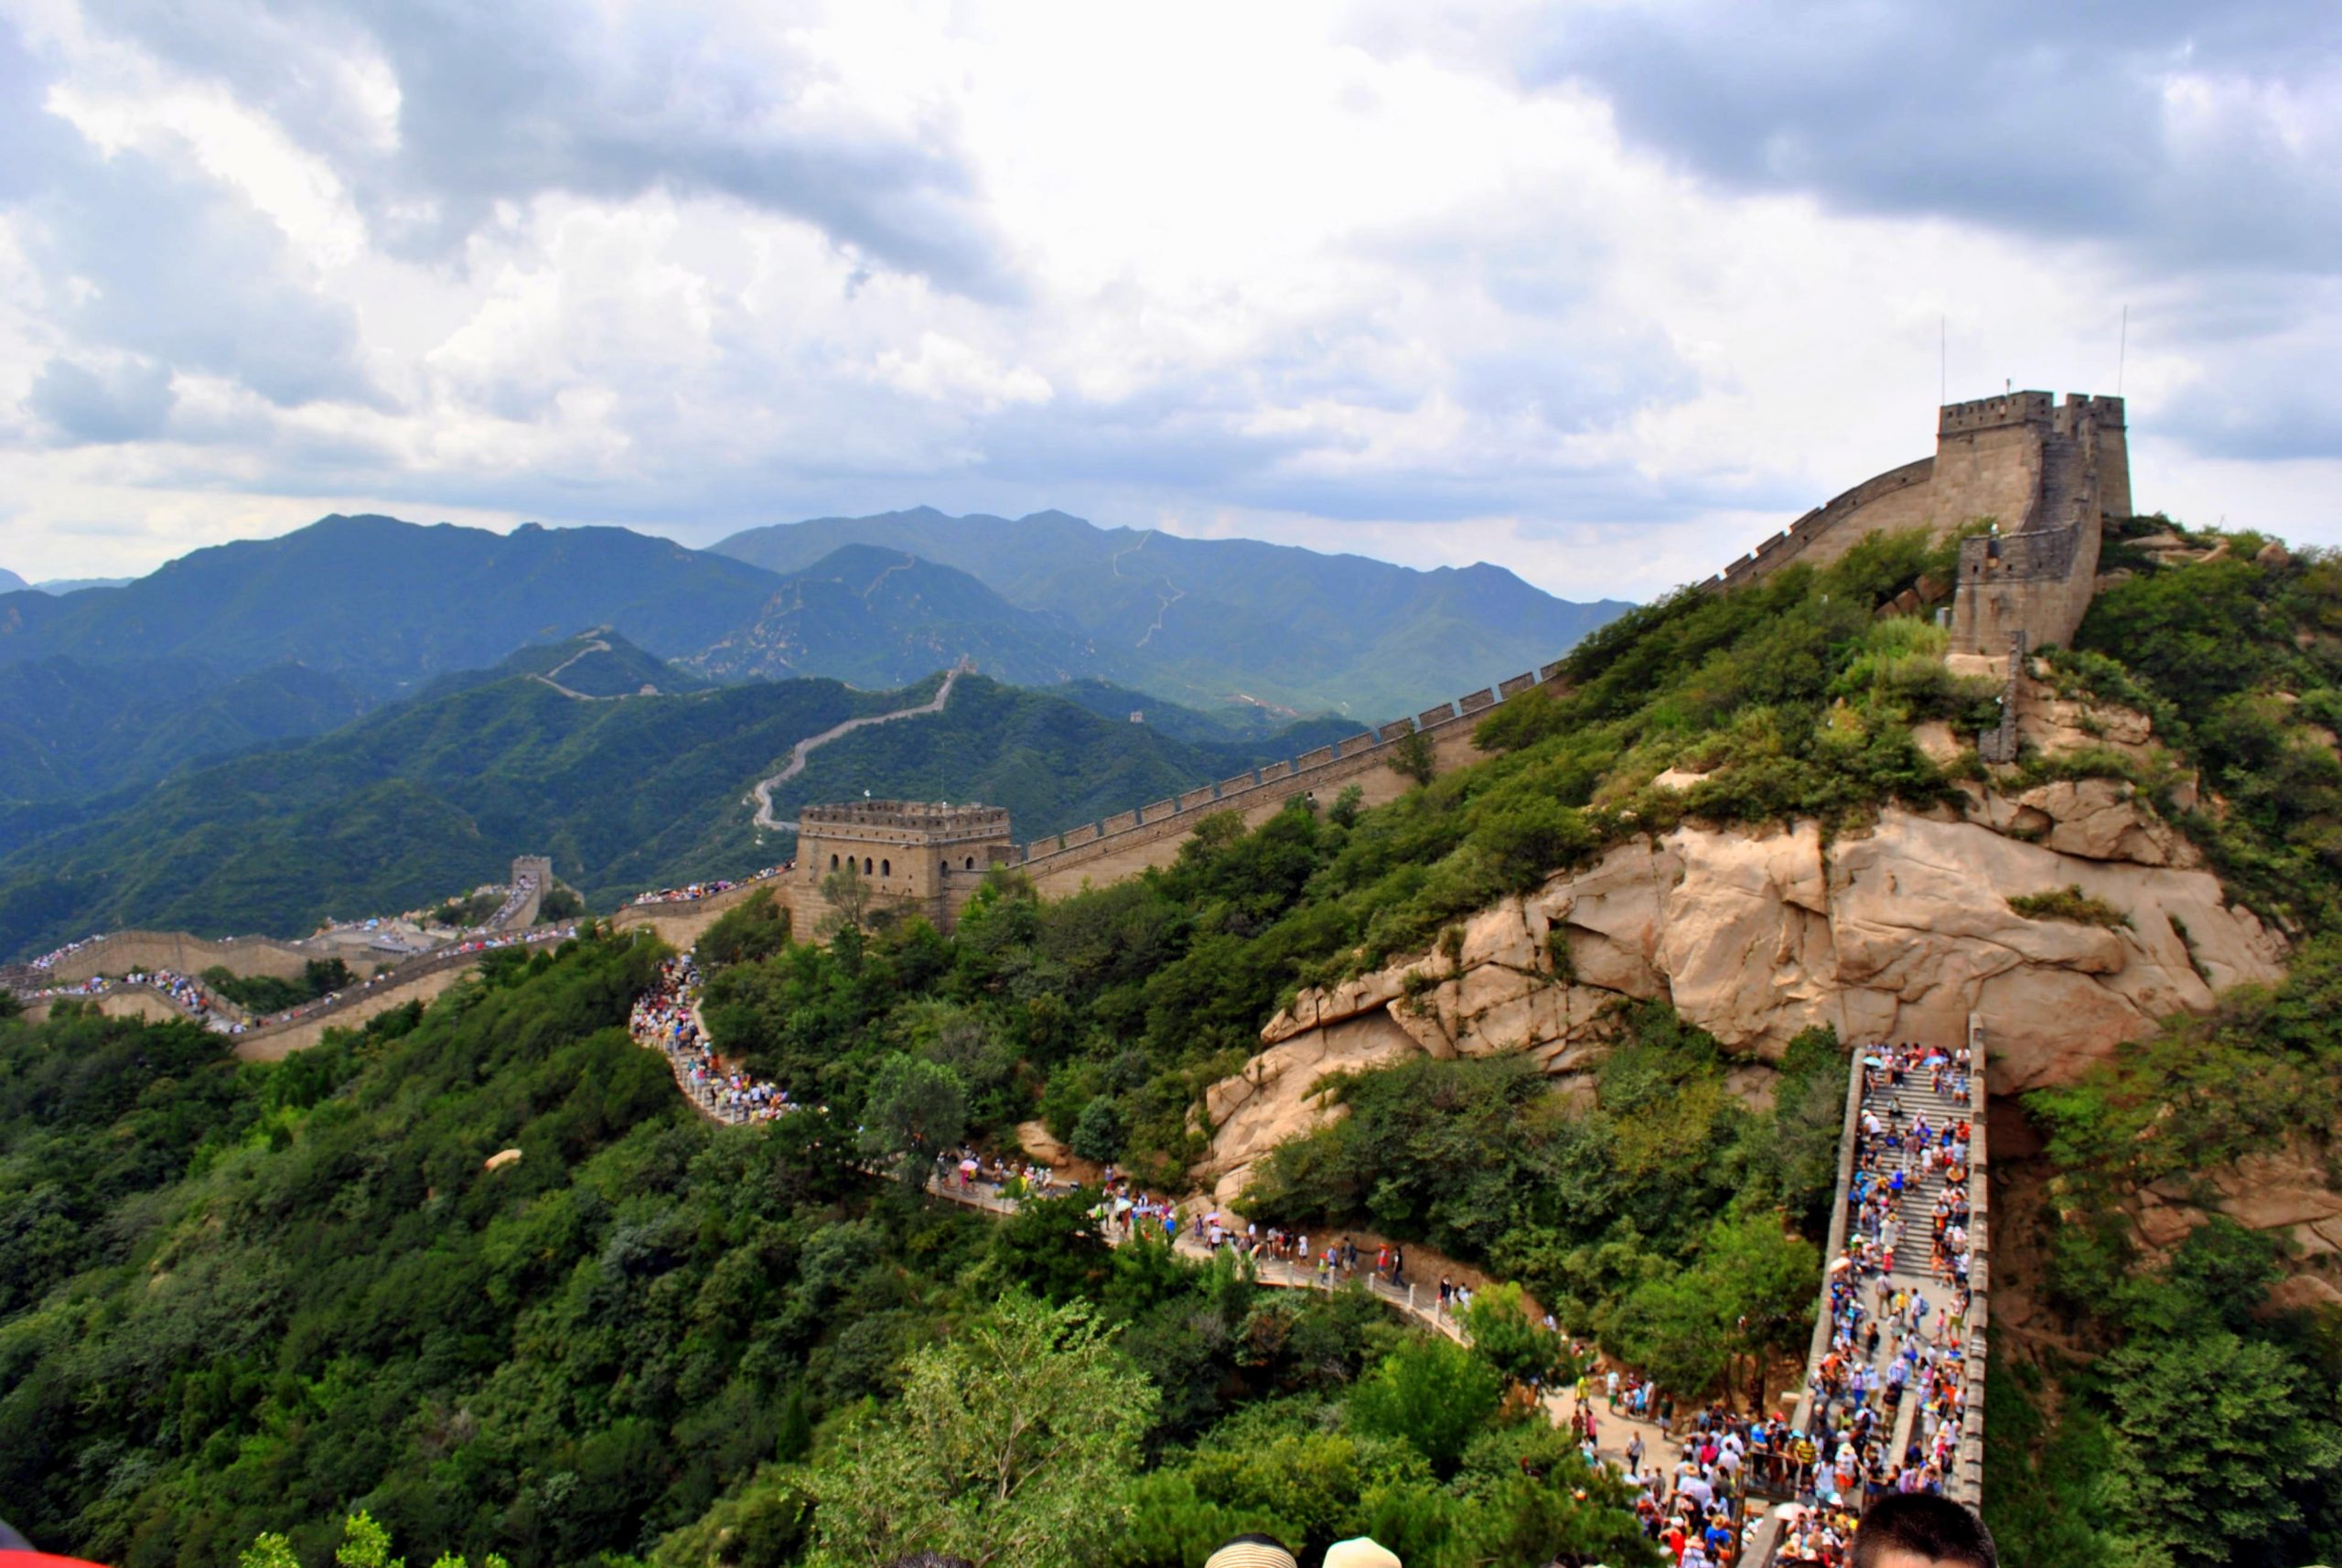 A view of the Great Wall